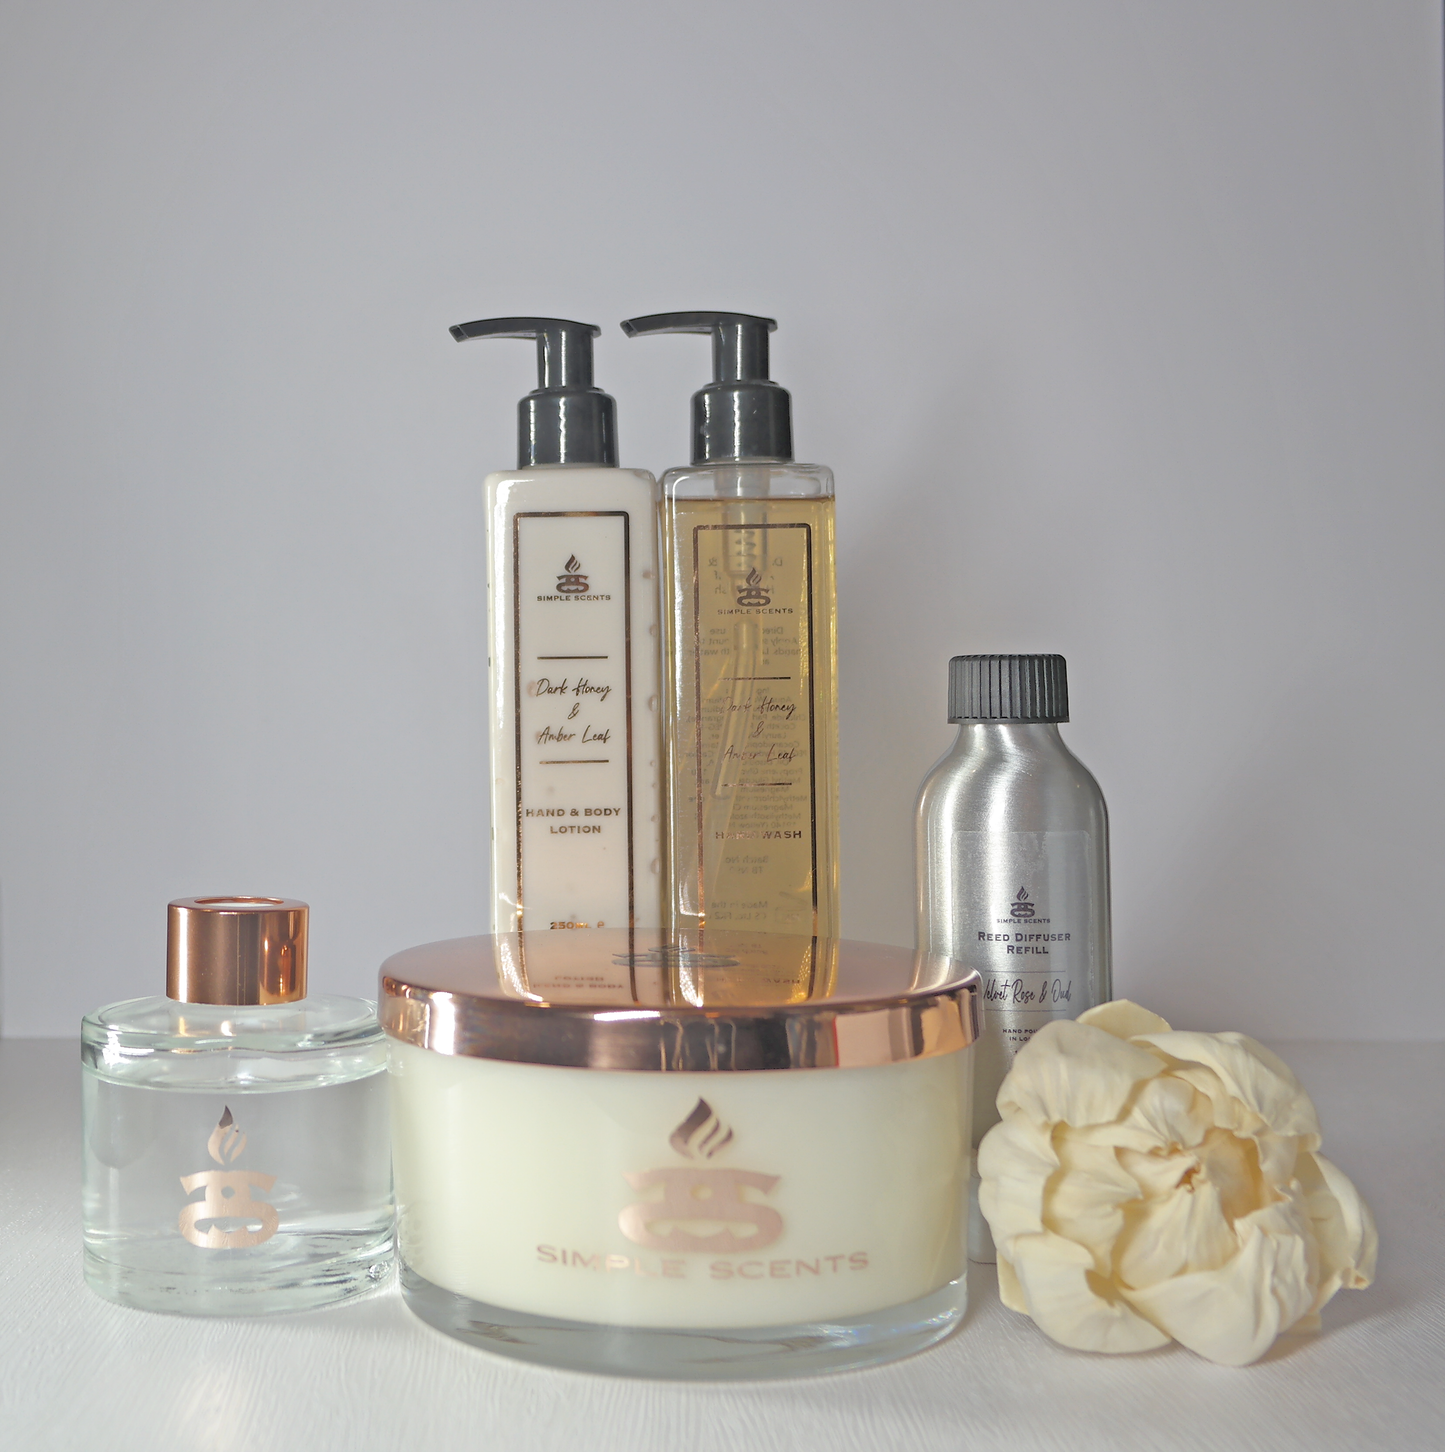 Simple Scents Experience Candle, Reed Diffuser & Diffuser Refill, Hand Wash & Lotion Gift Set